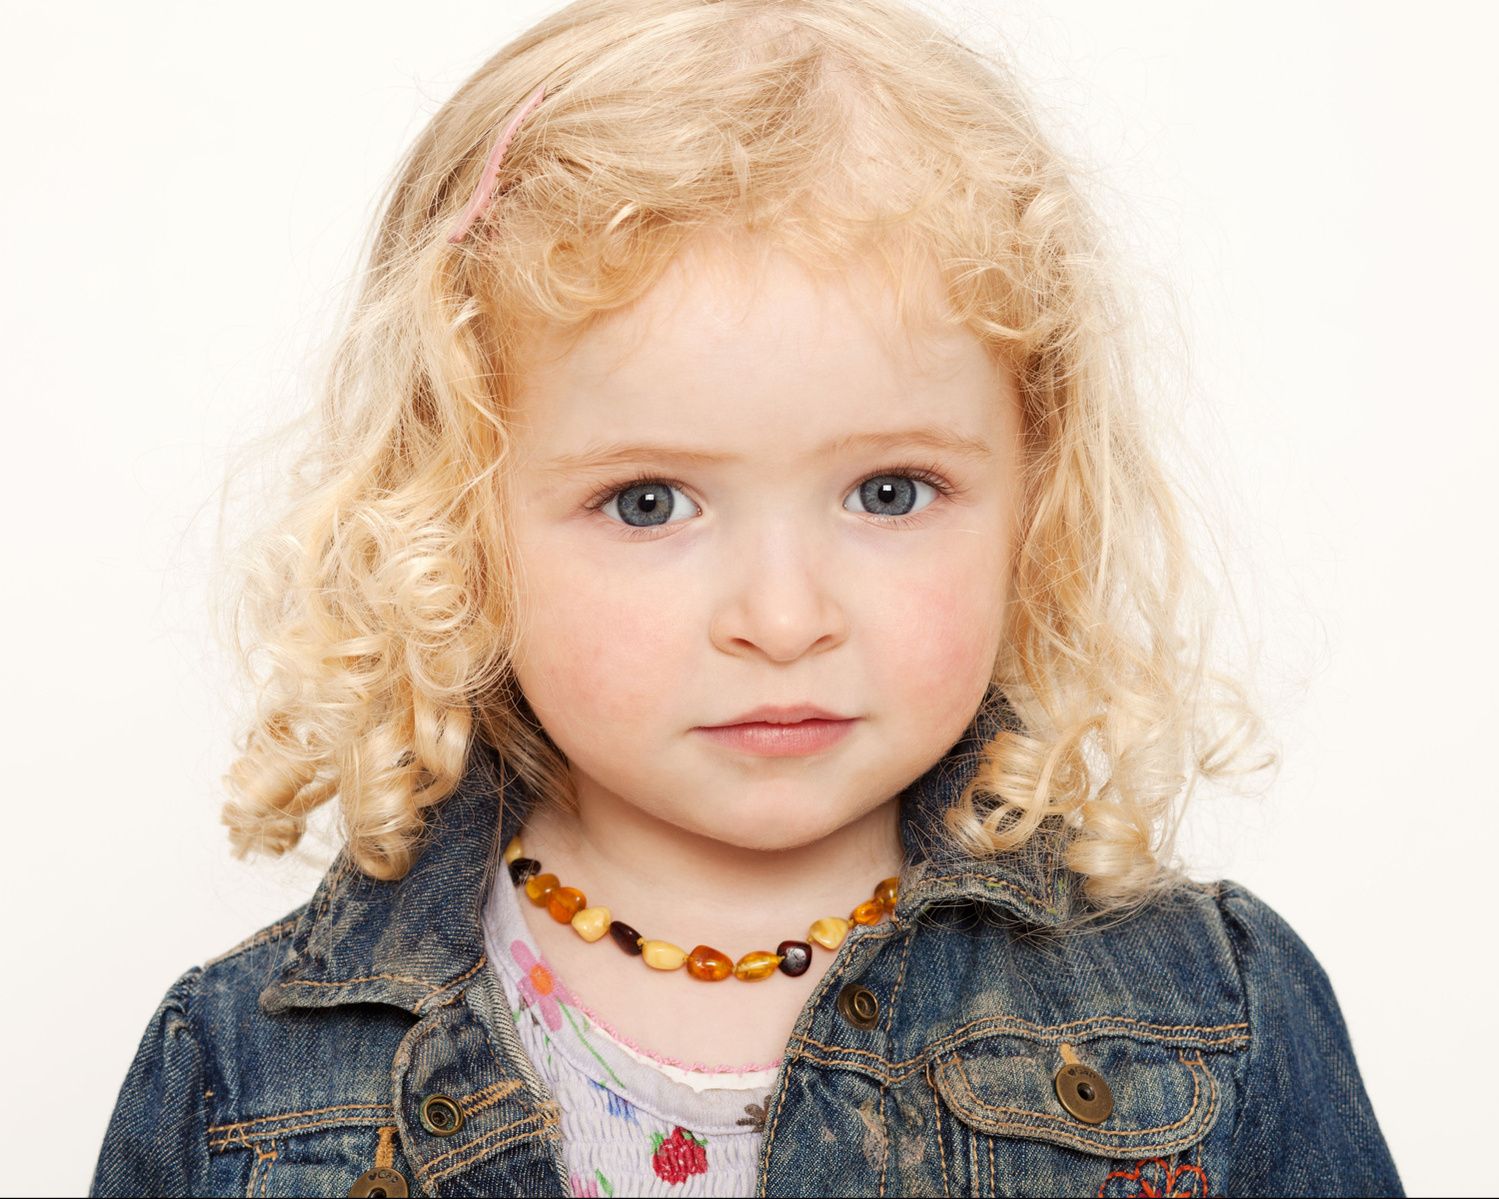 Close up head and shoulders portrait of young girl with blonde hair and denim jacket in professional photo studio white background